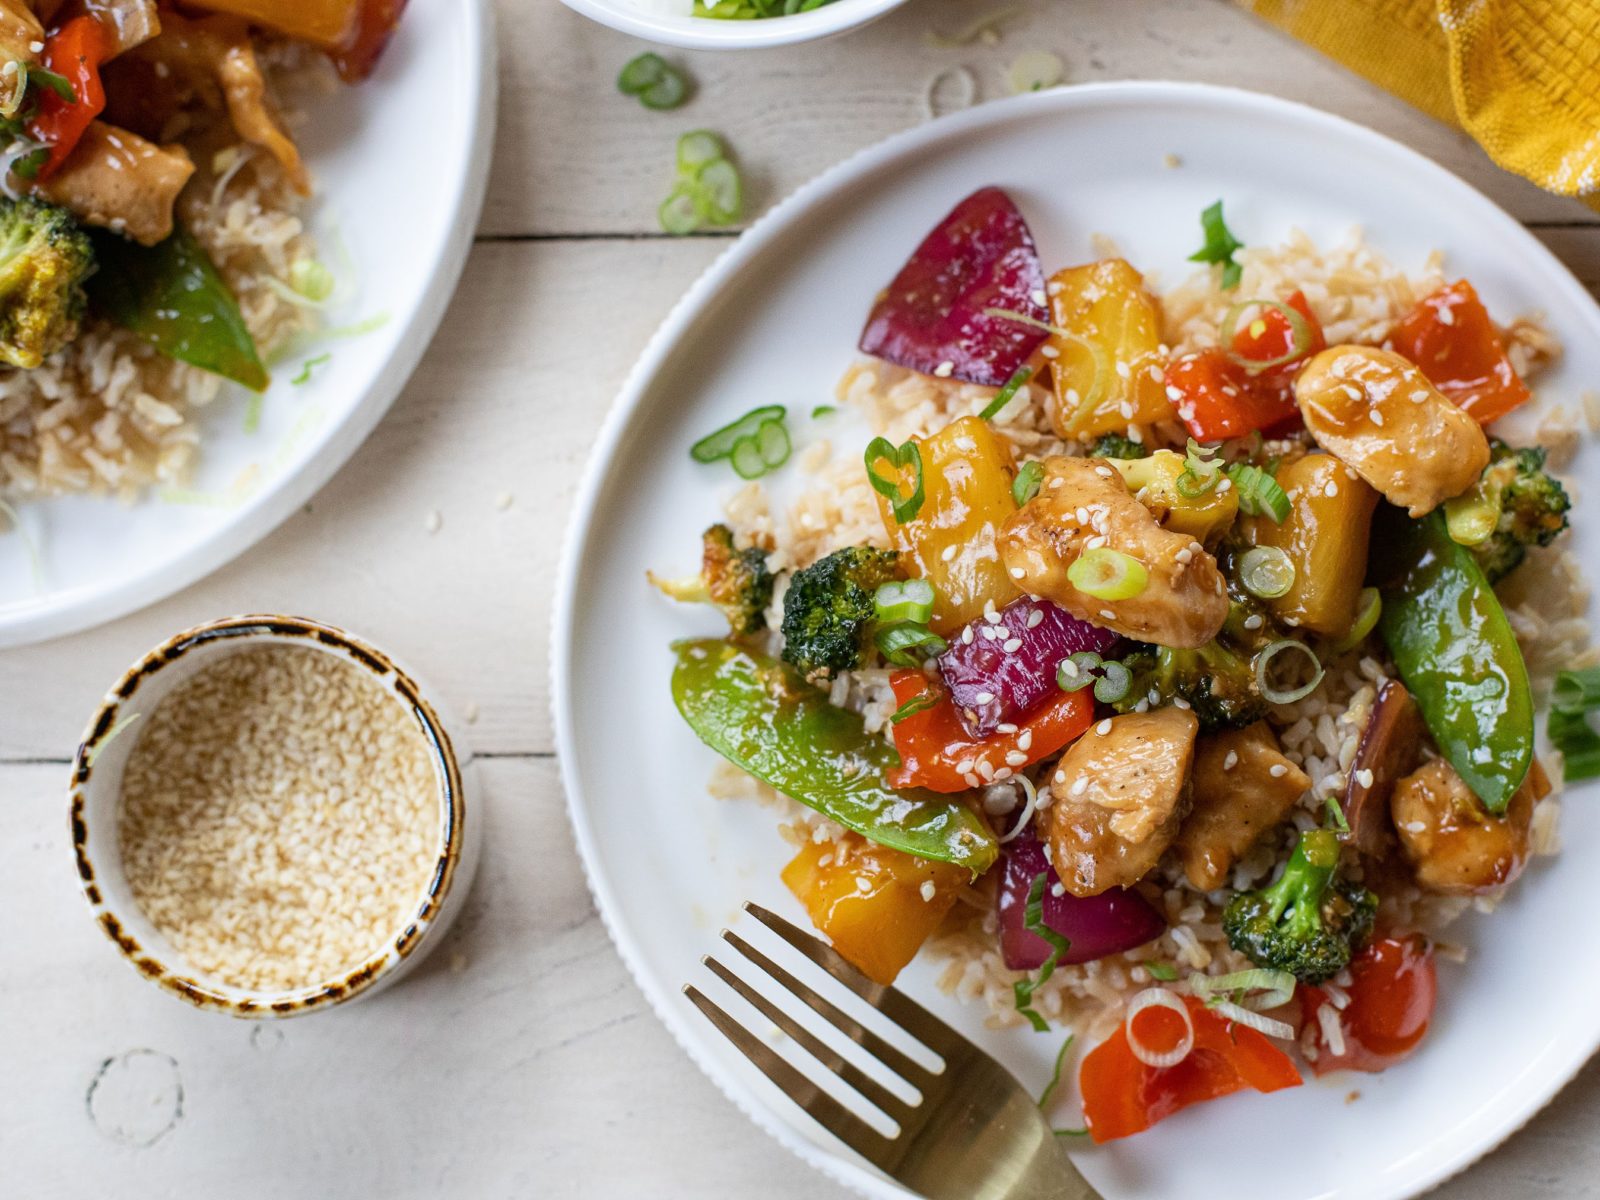 Try My Easy and Healthy Pineapple Chicken Stir Fry  - Save On Delicious Minute Or Success Rice NOW At Publix on I Heart Publix